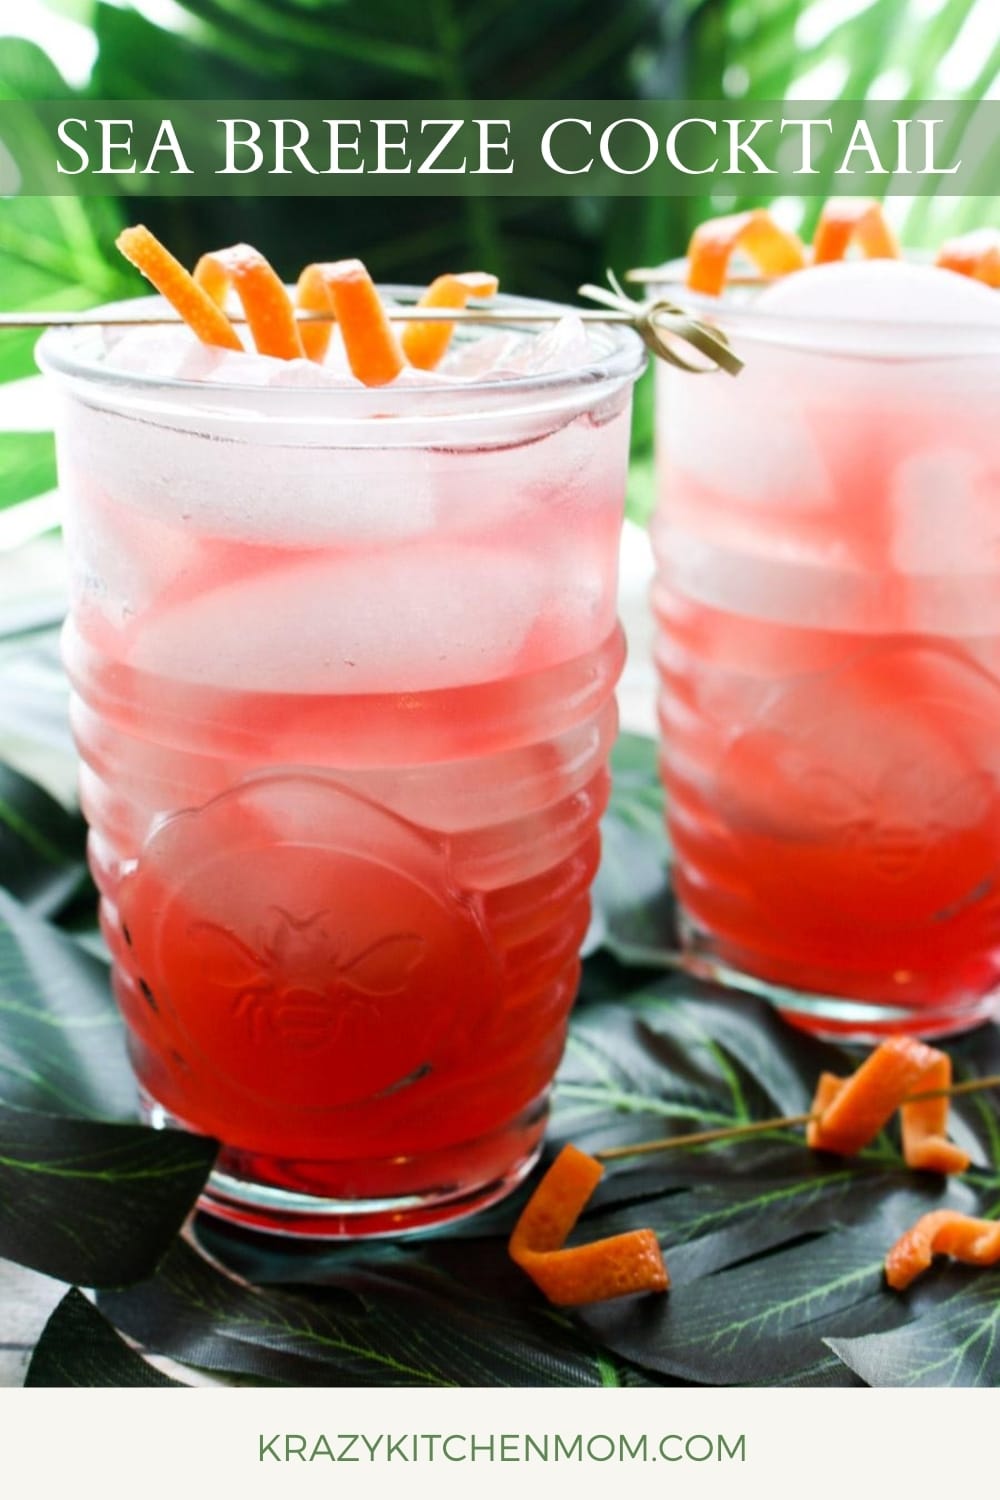 It's summertime...time for sunglasses, flip flops, floppy hats, and lounging in the sun. It's also time for my go-to summer sipping Classic Sea Breeze cocktail.  via @krazykitchenmom